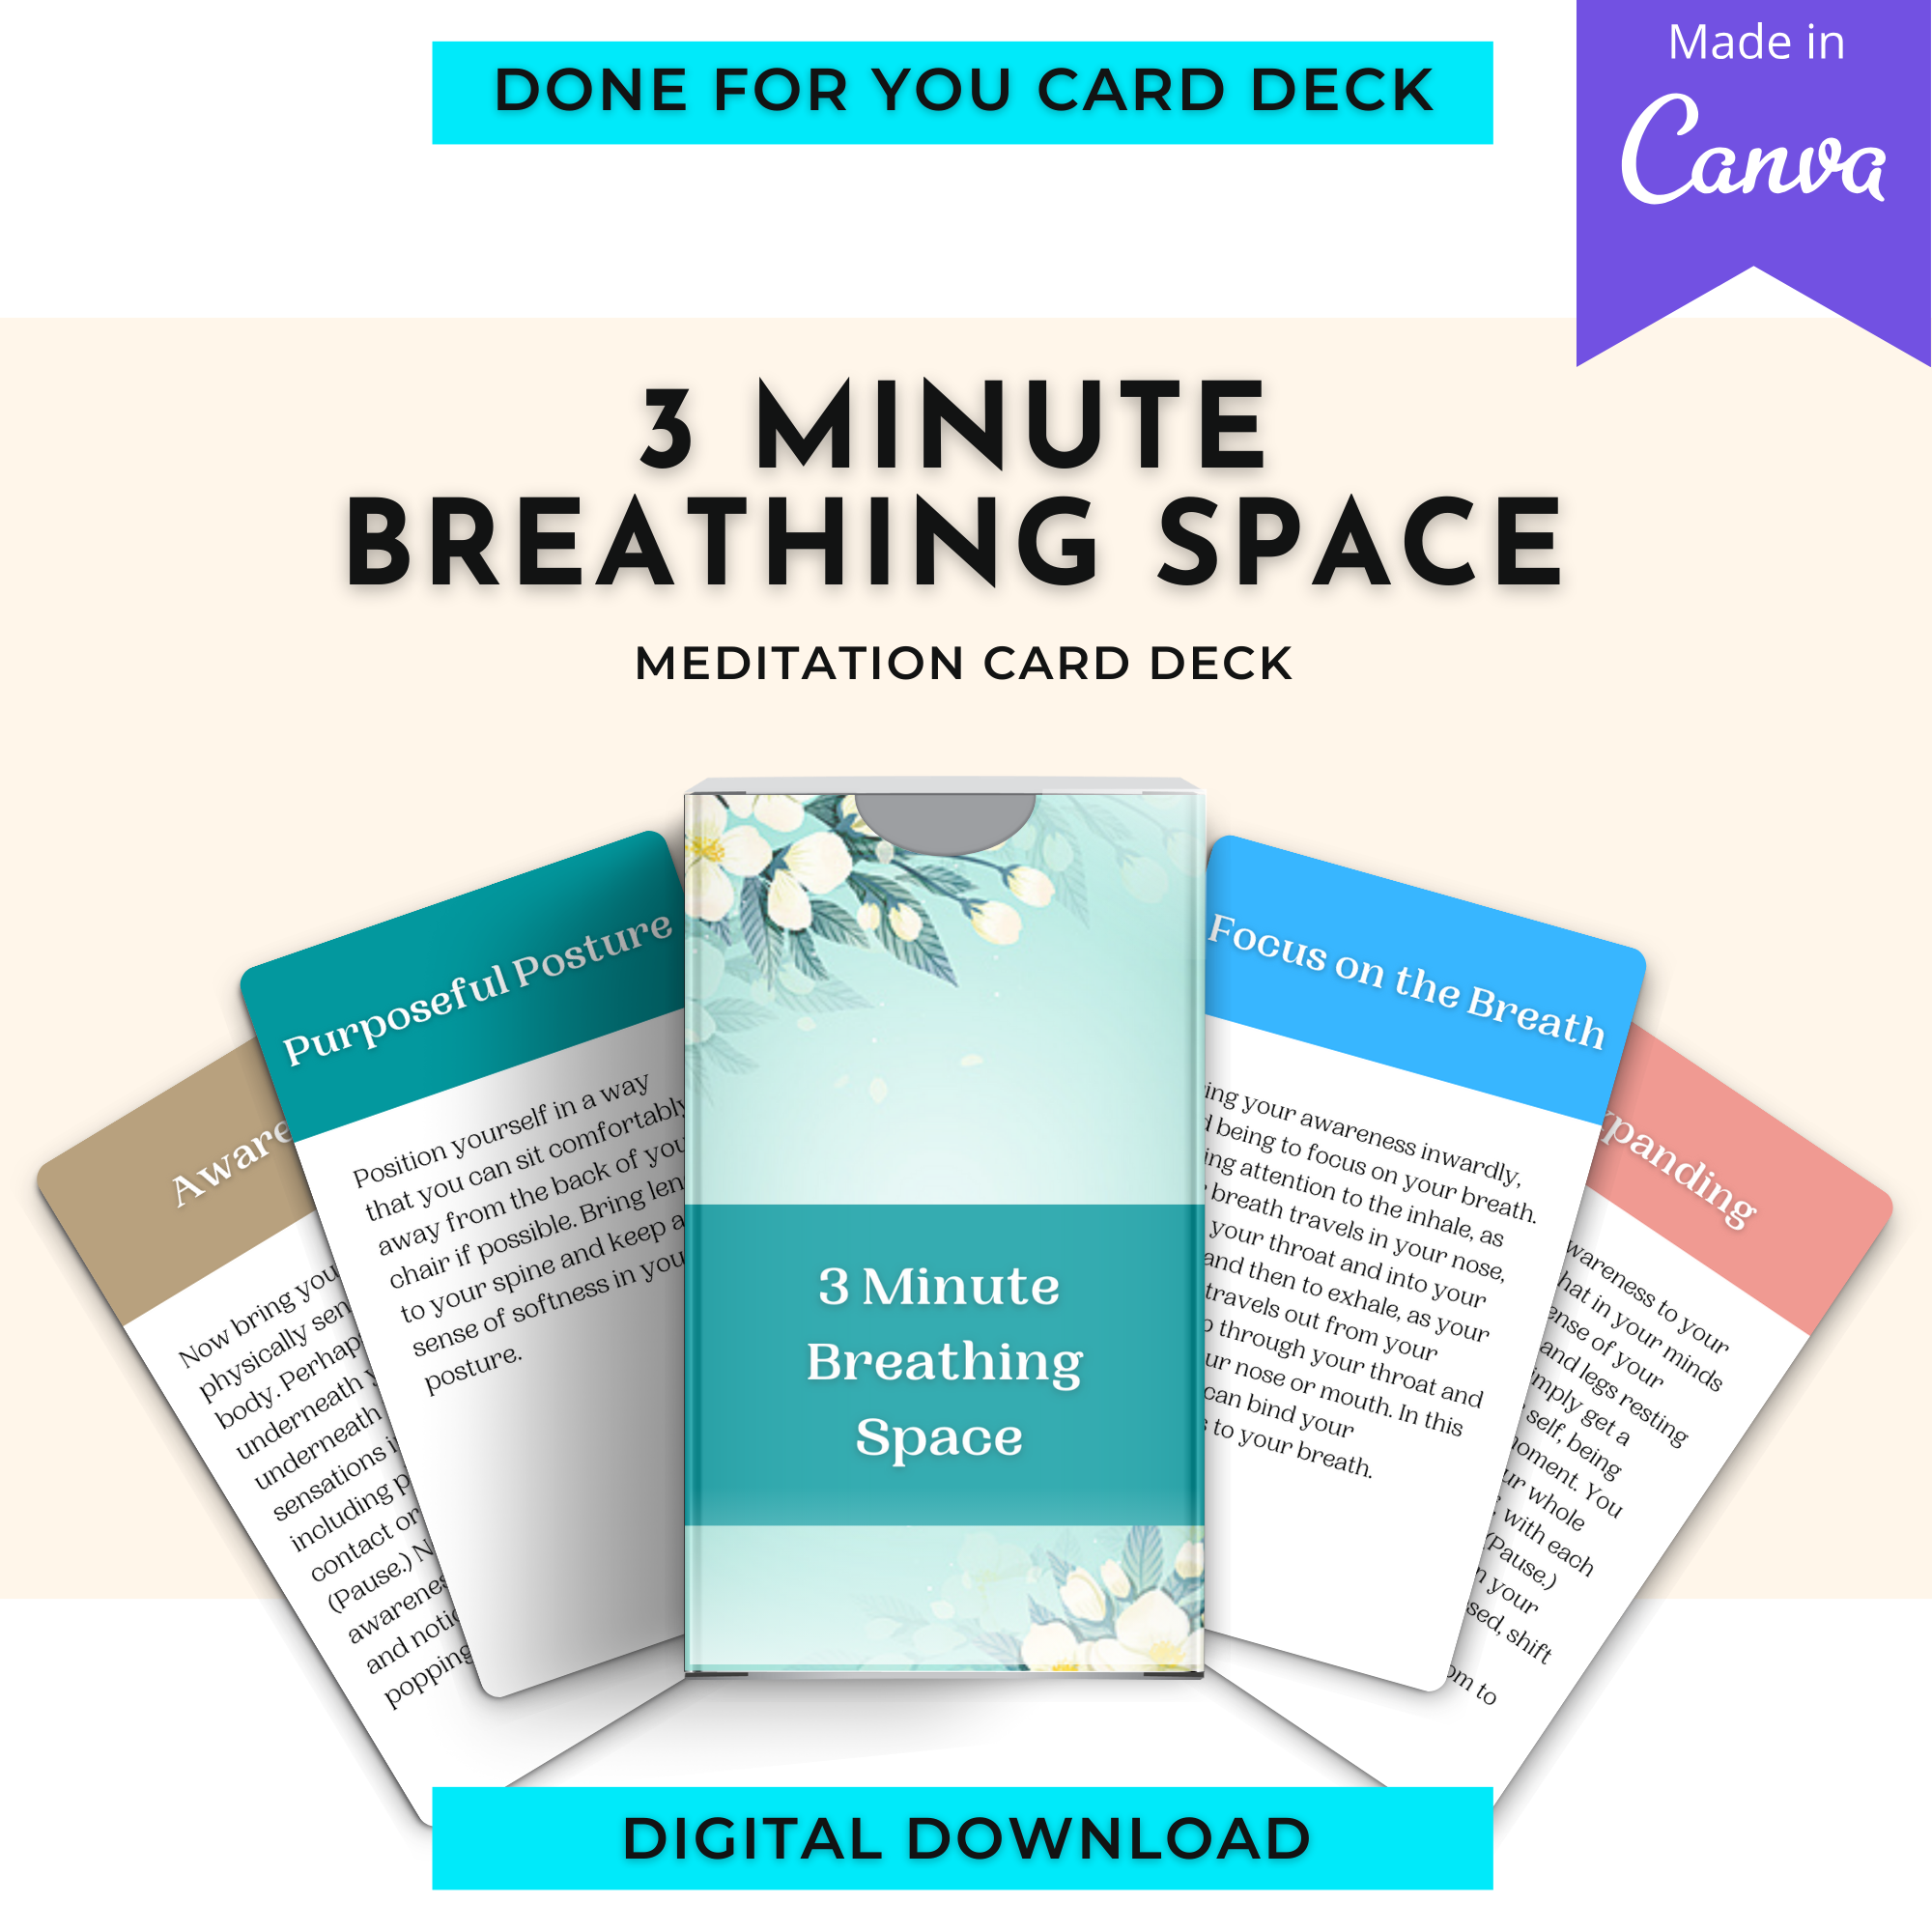 3 Minute Breathing Space Meditation Card Deck | Editable 9 Card Deck in Canva | Commercial Use